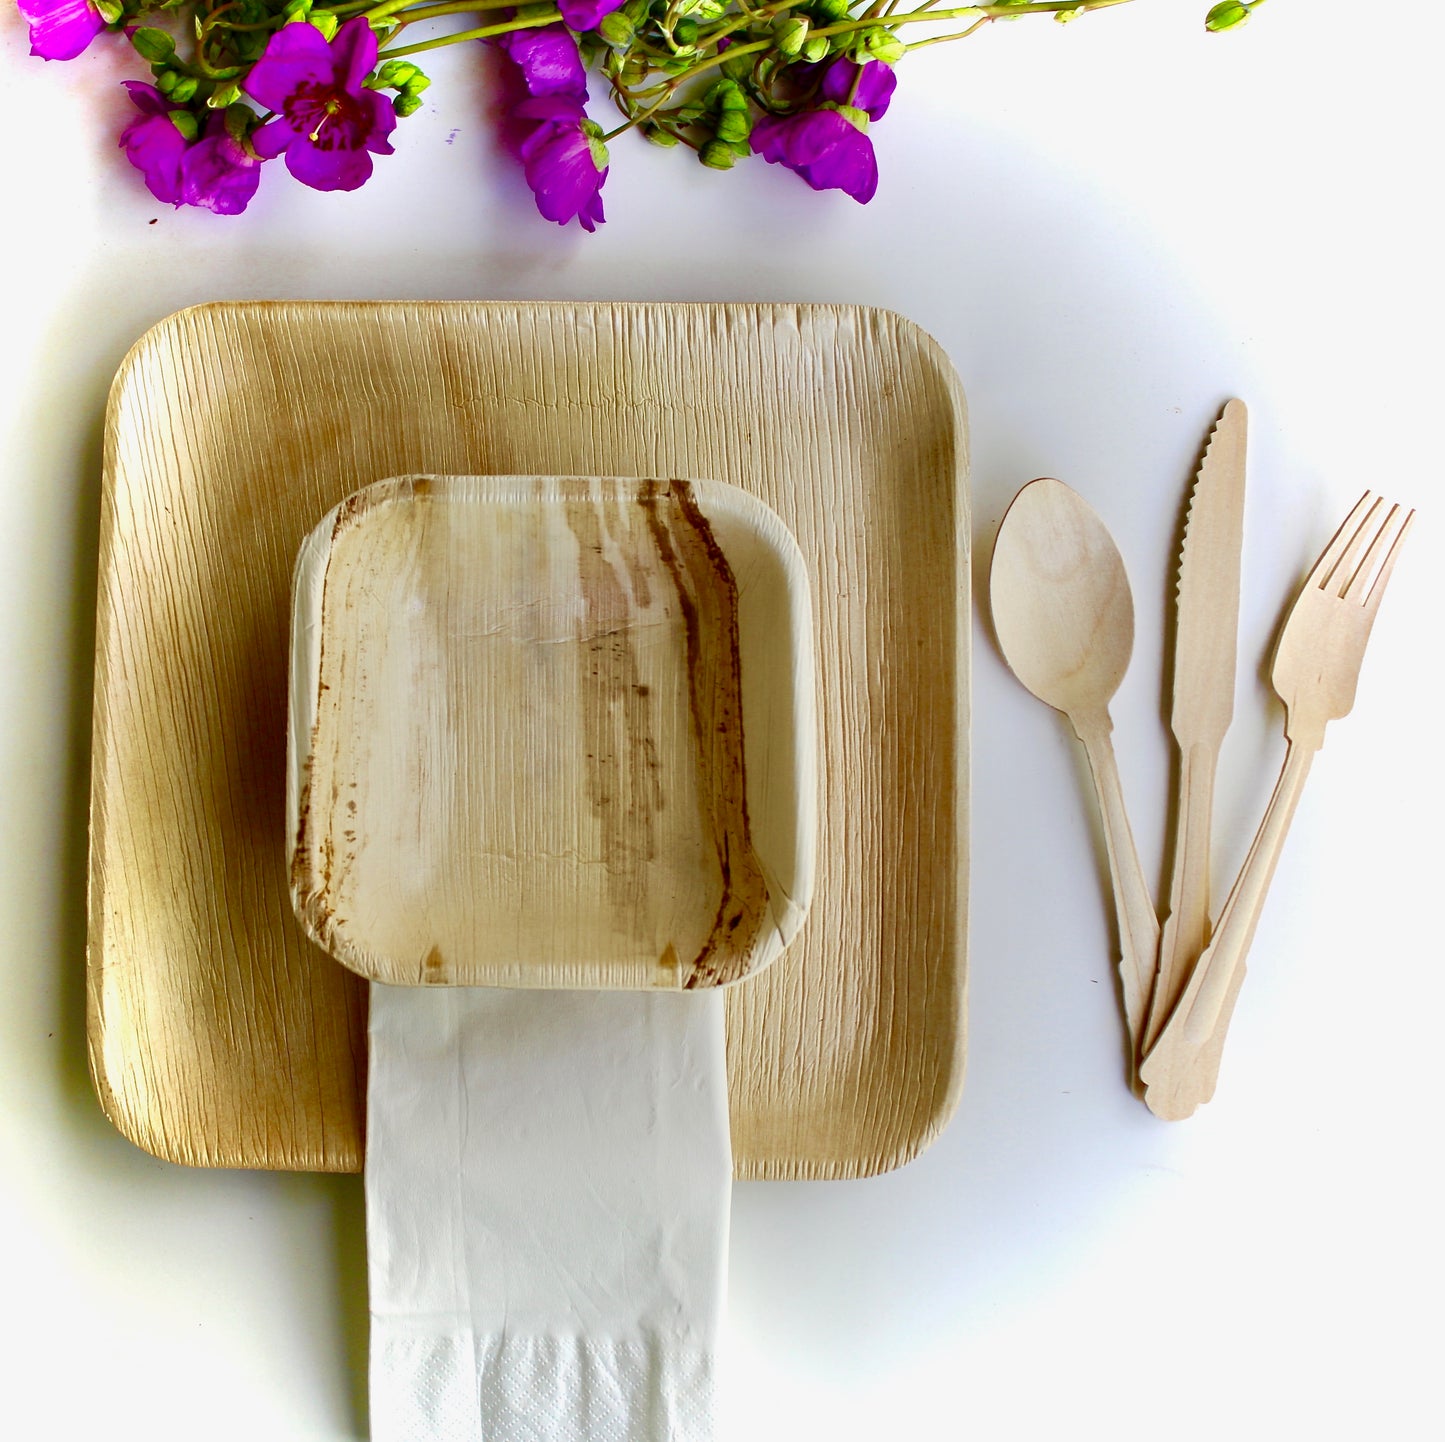 Bamboo Type Palm Leaf 10 Pic 9.5" Square - 10 pice 7" Square " - 10 pic 6" Square  - 30 pic Cutlery - 50 Pic Napkin